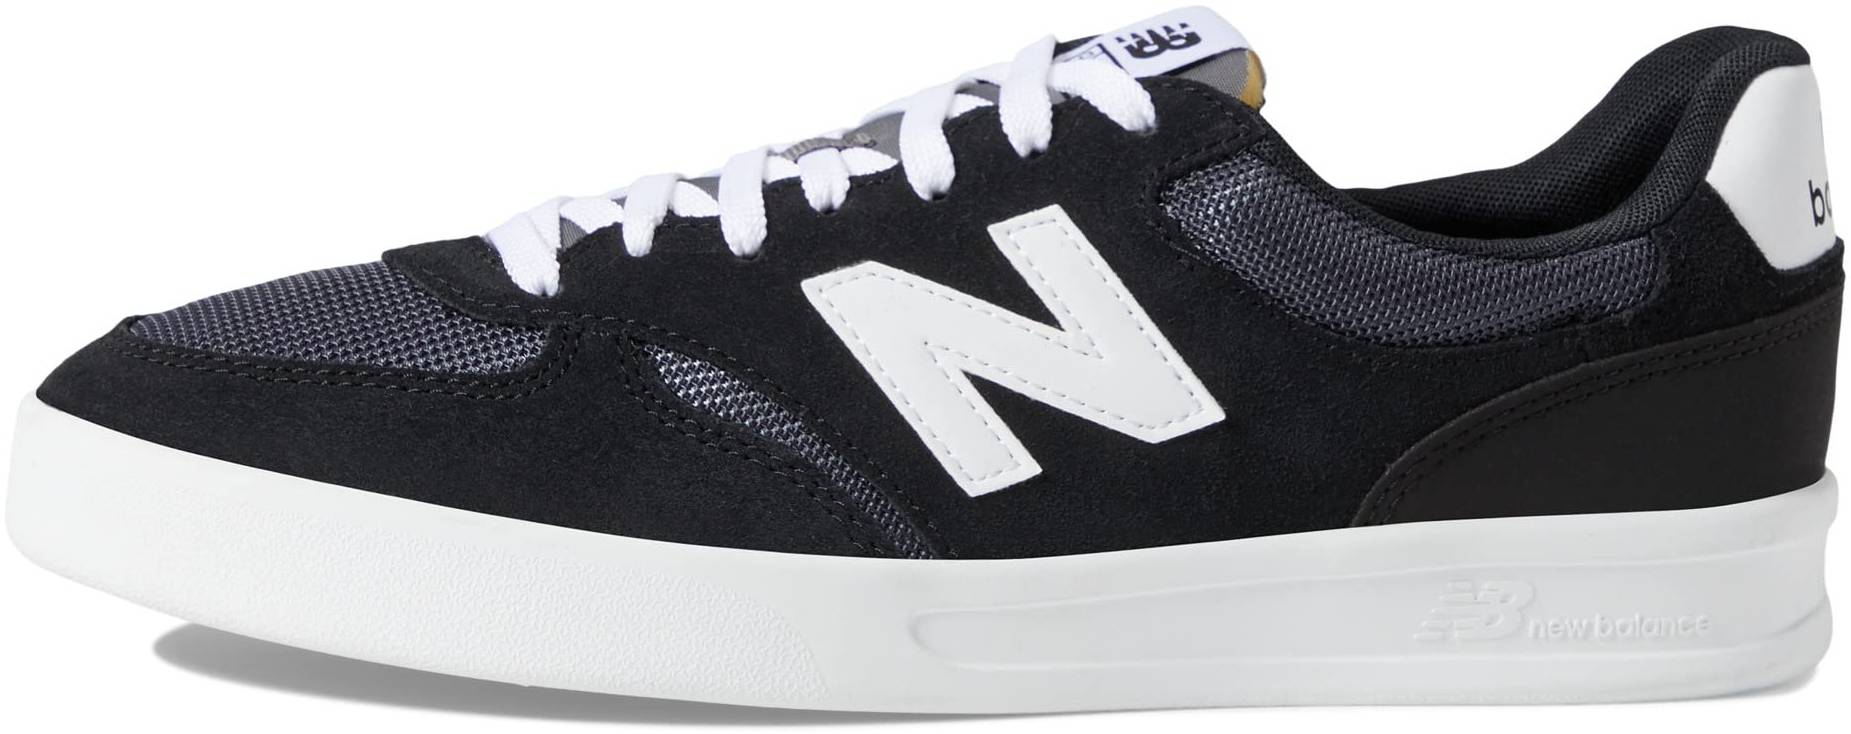 Pay attention to Street enter New Balance 300 sneakers in 3 colors (only $36) | RunRepeat